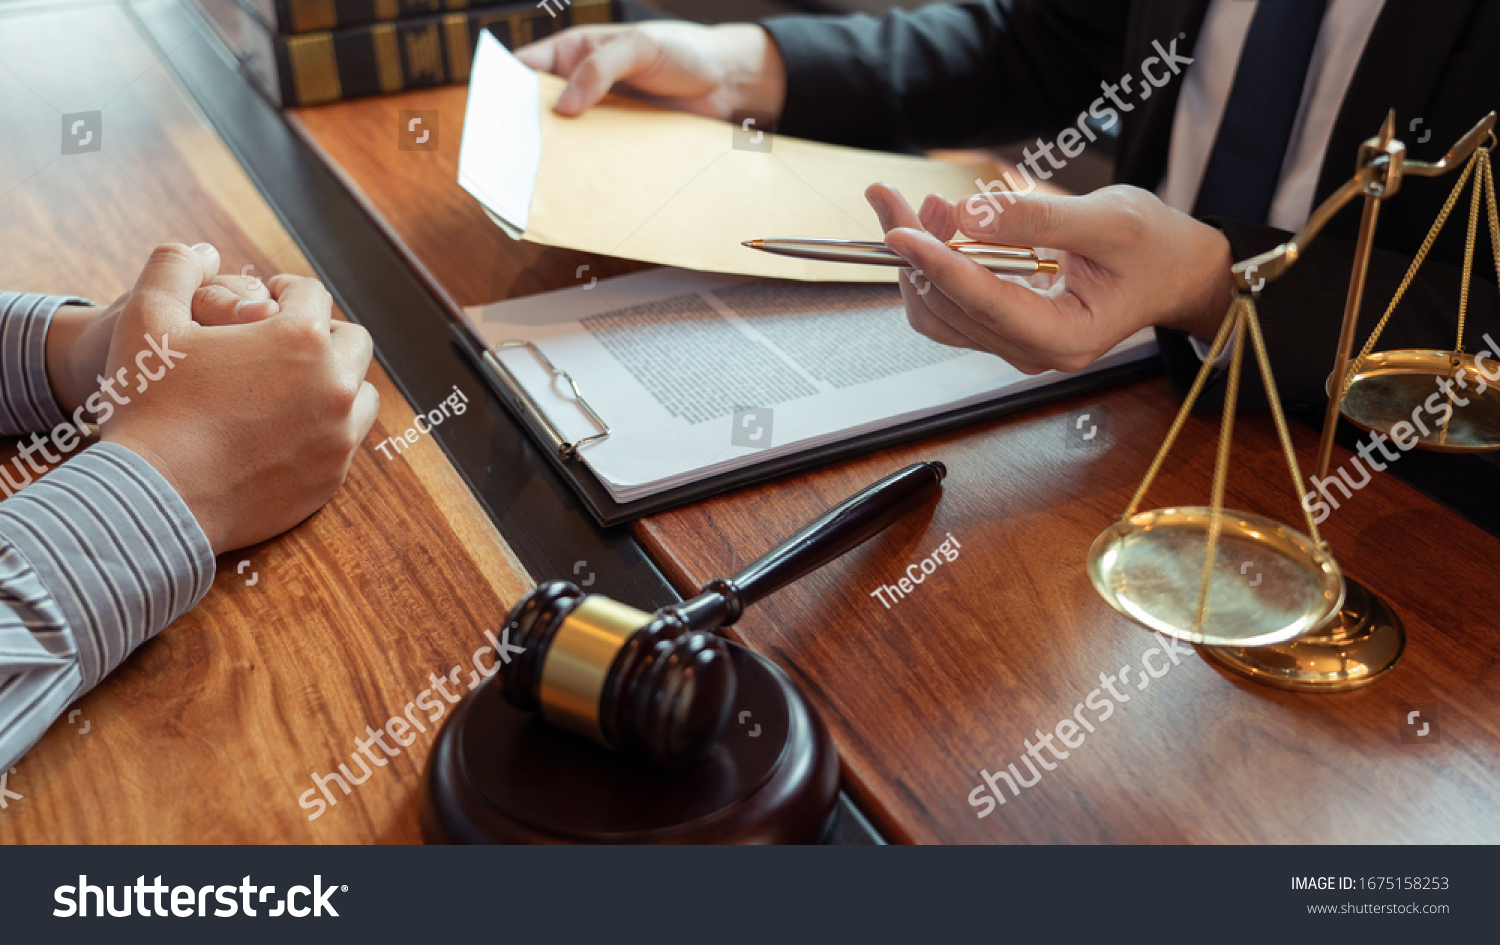 lawyer-working-with-client-discussing-contract-papers-with-brass-scale-about-legal-legislation